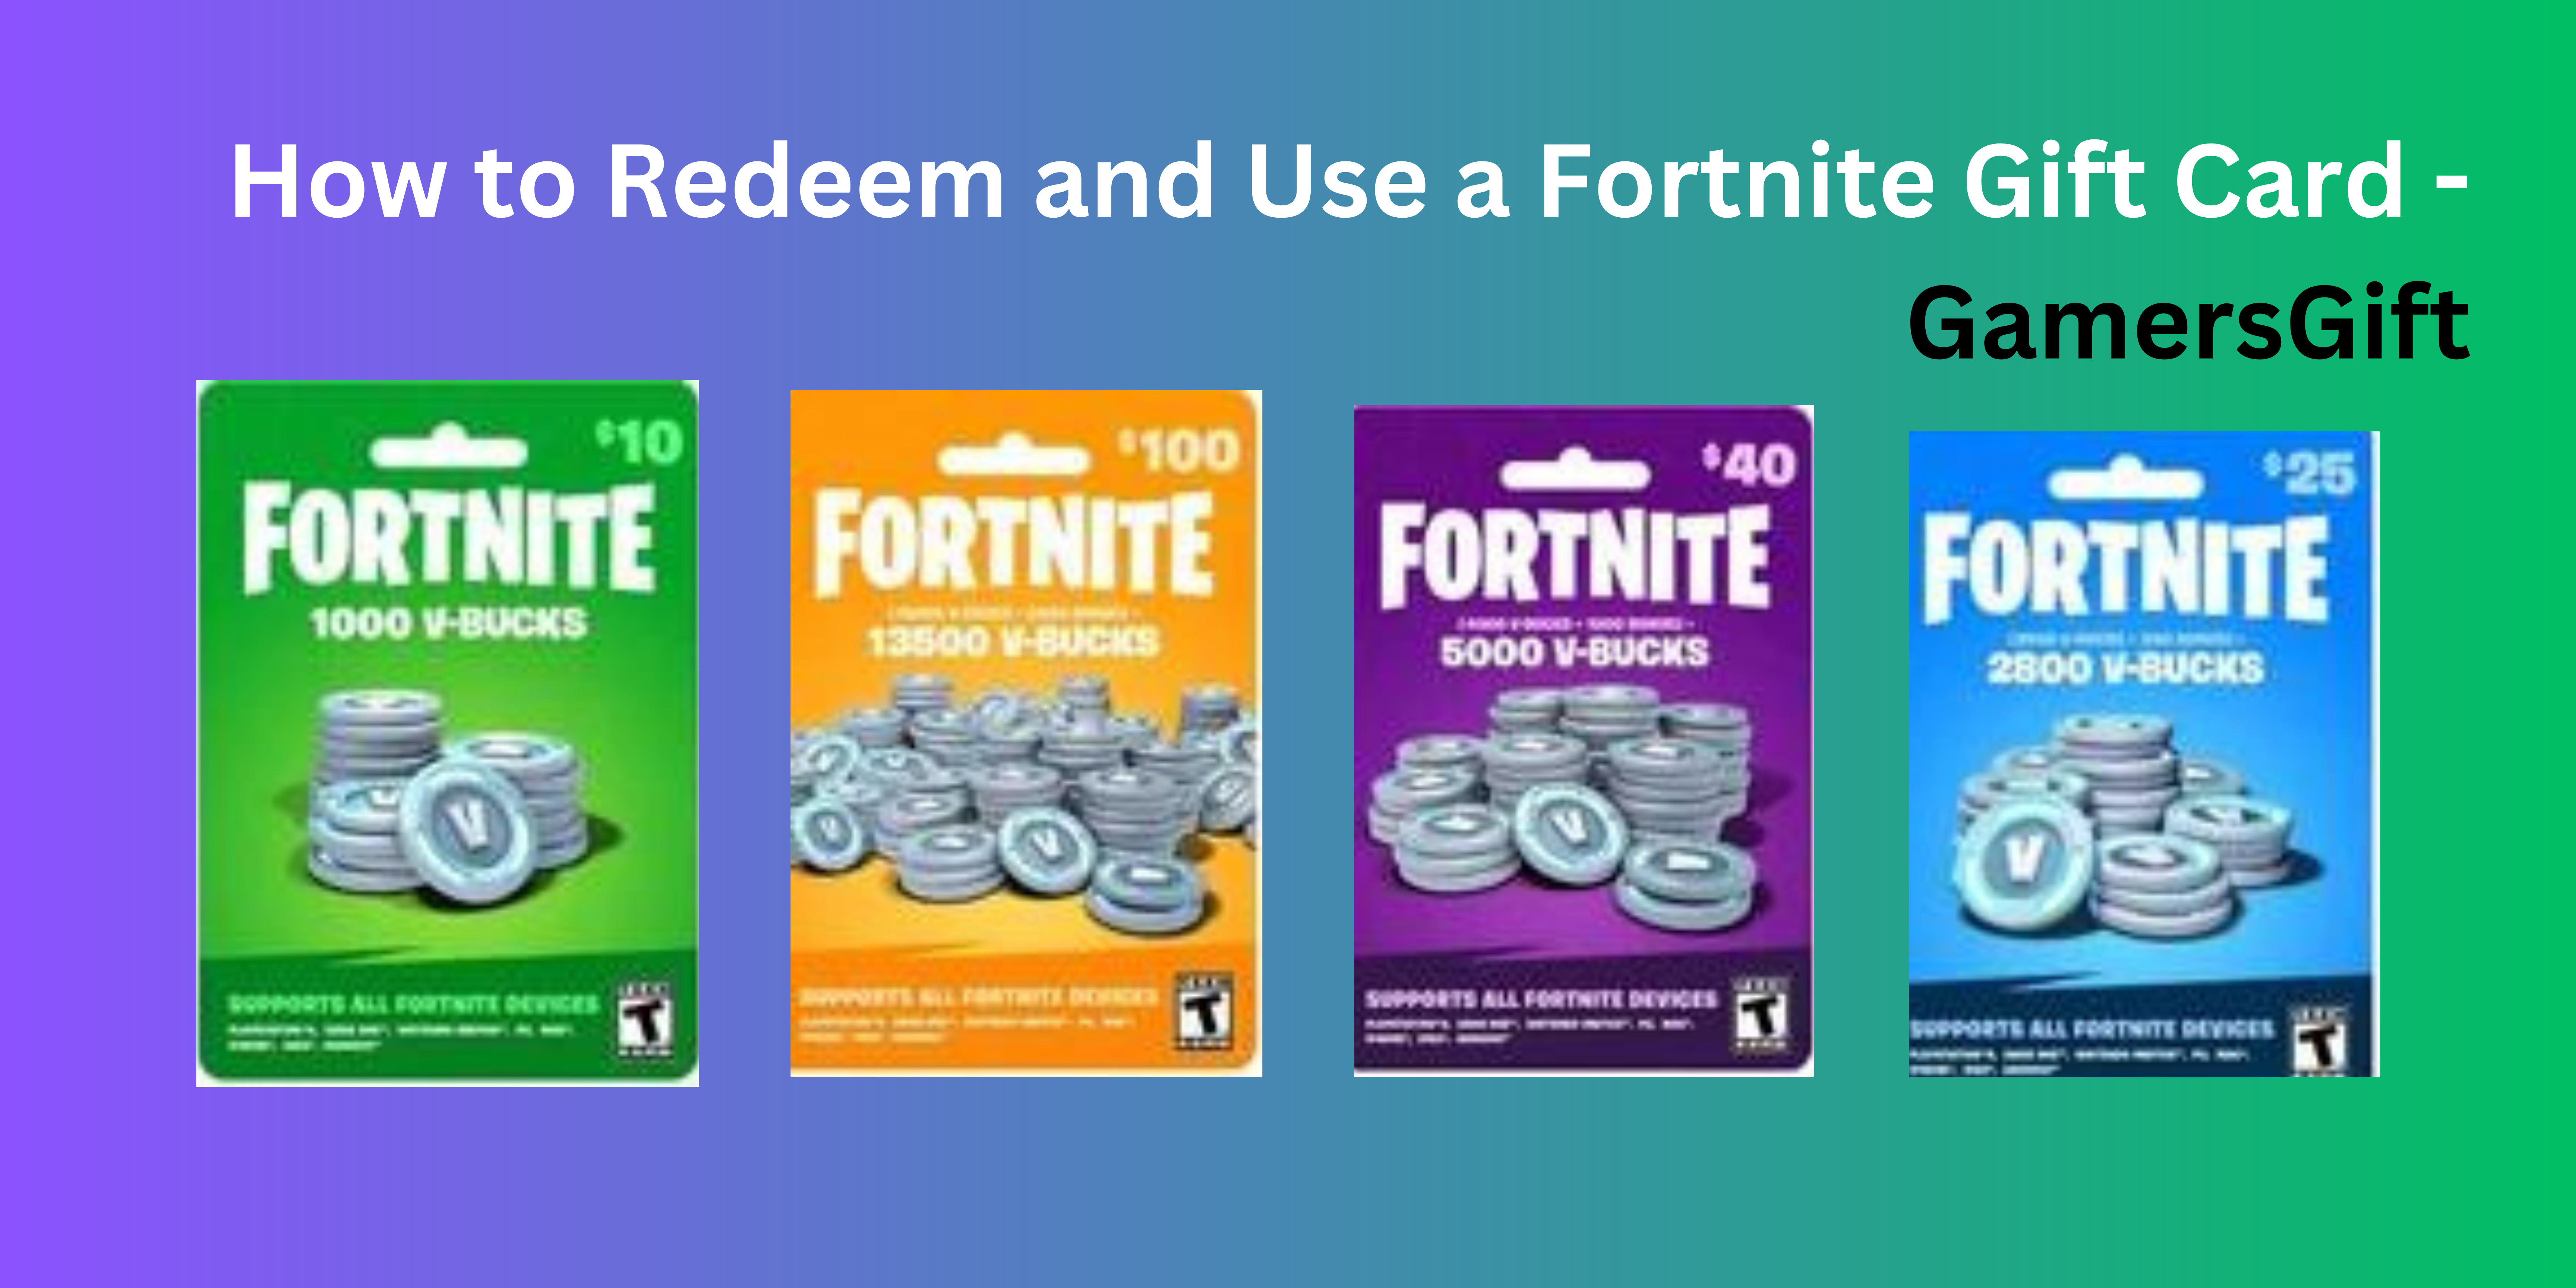 How to Redeem and Use a Fortnite Gift Card -

i
os 2.10

    

=
=

 

a0
dang FTN dL rn 4
————— —— 3 POPSORTE ALL FORTWITE DH VICES 1

 

RR

 

|
ir
a UL AA RYE As aa RL *)

Ee JE IE a ed
TE WET